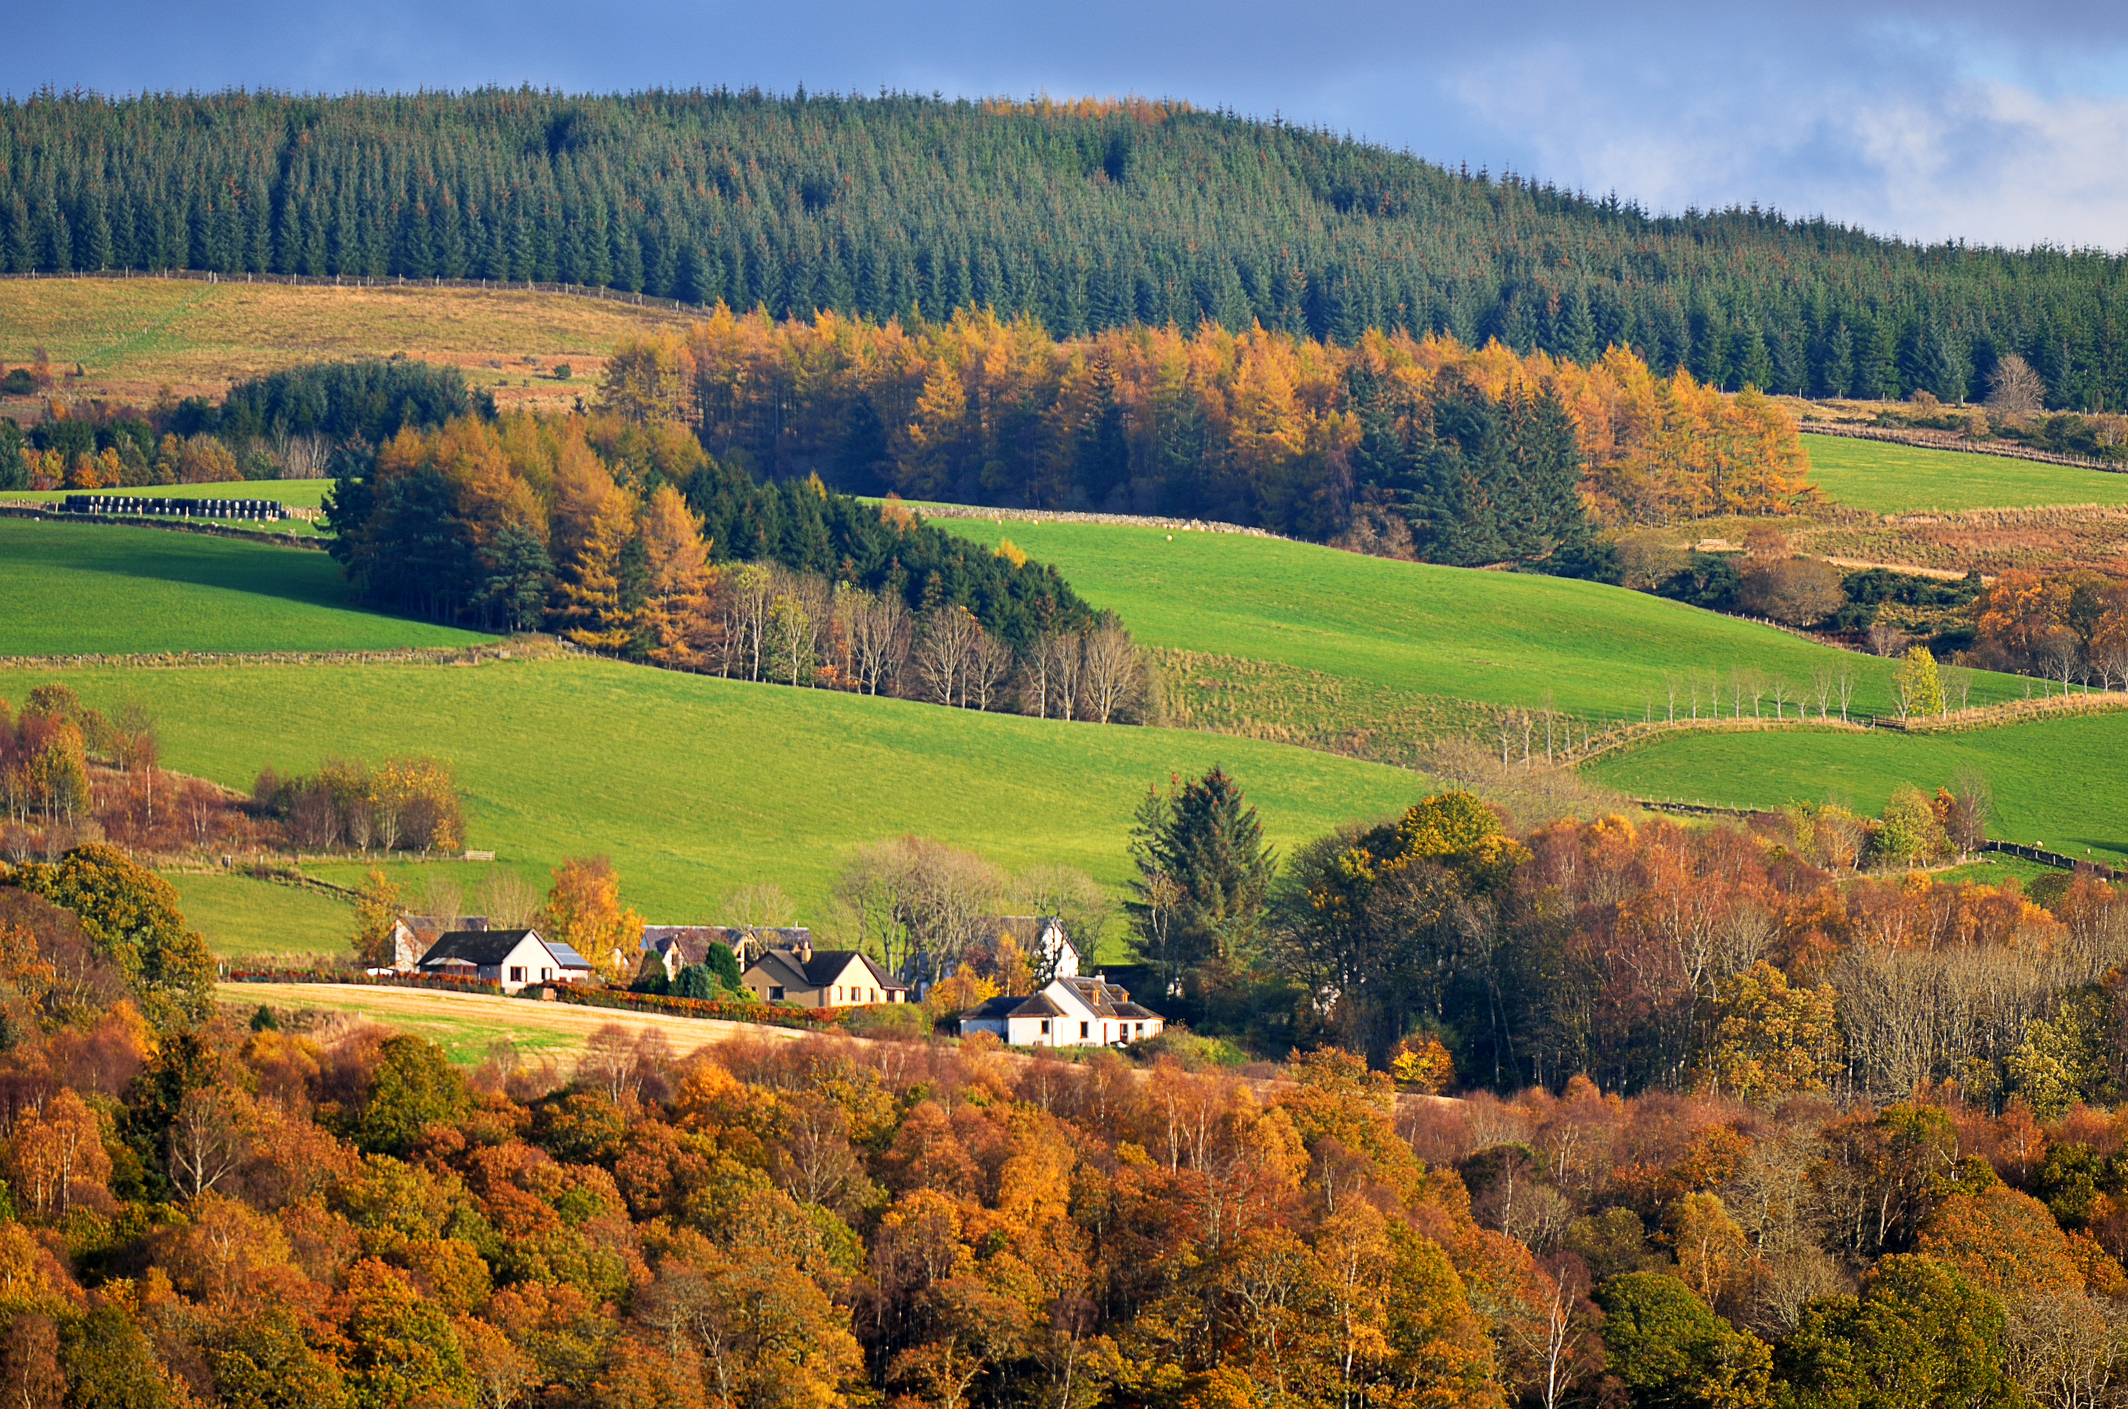 Scottish farmers earn among the lowest support rates in Europe.